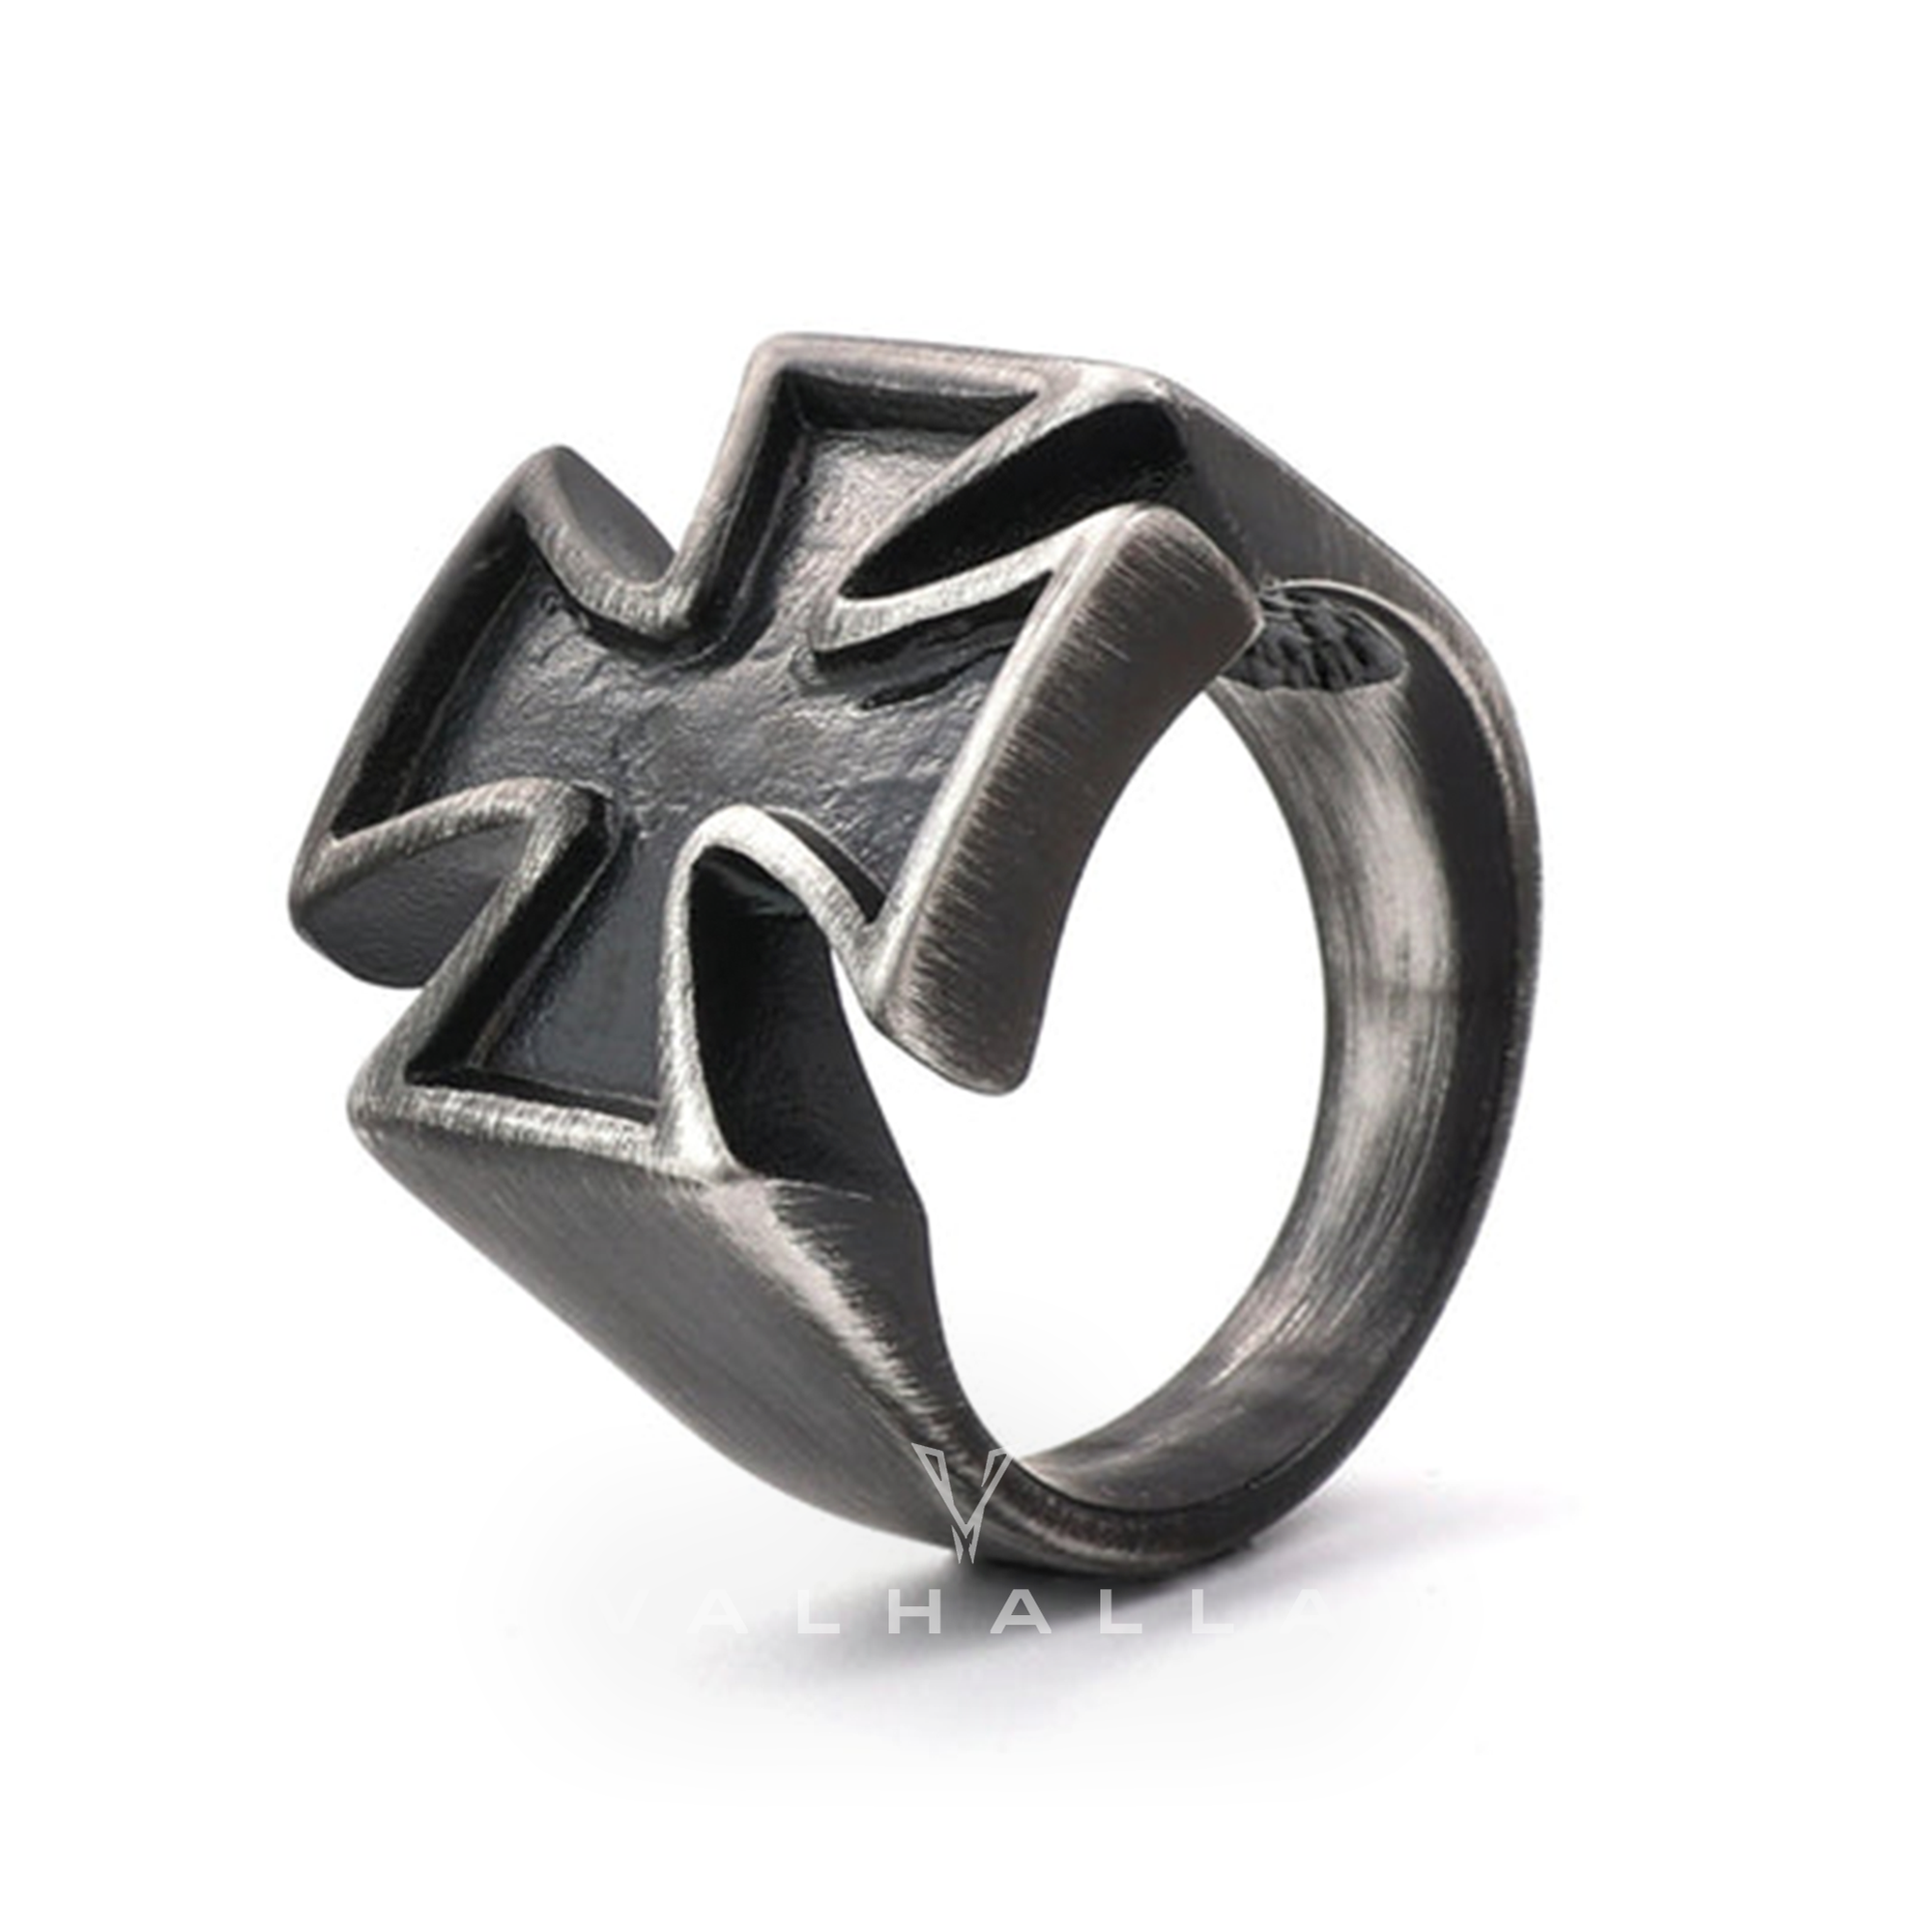 Vintage Iron Cross Stainless Steel Ring